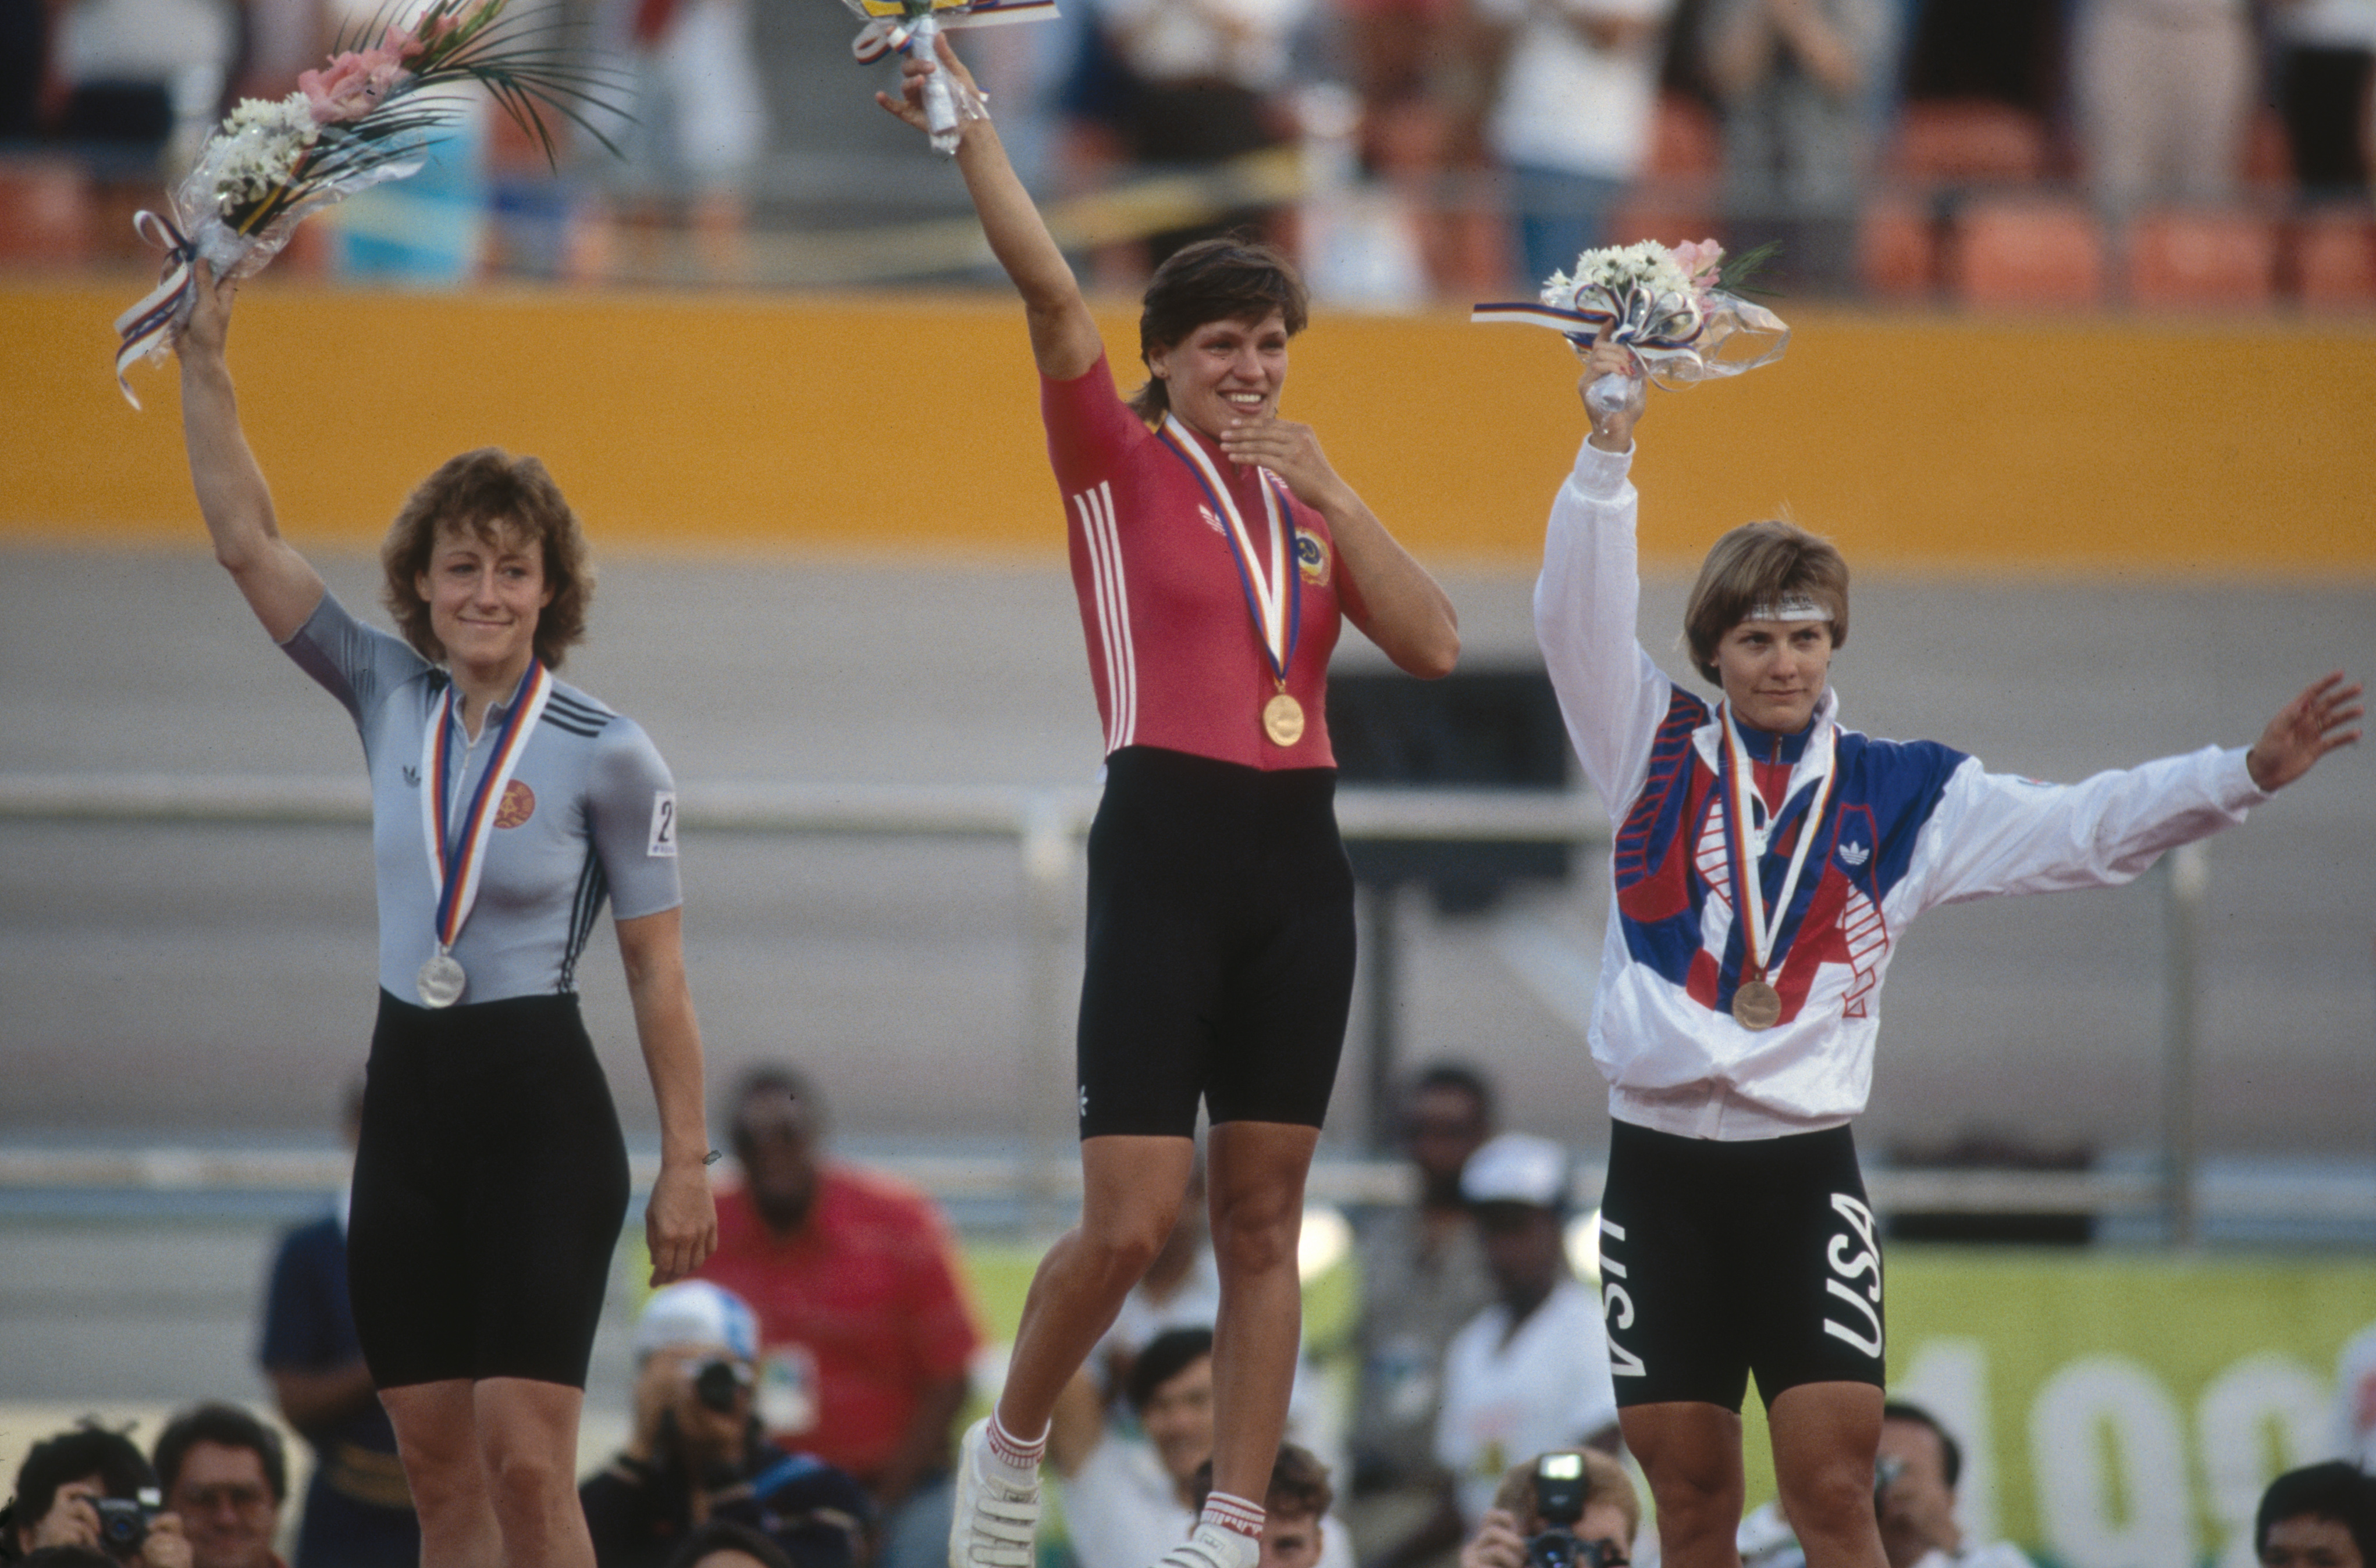 Silver medallist Christa Luding of East Germany, Gold medallist Erika Salumae of the Soviet Union and right Bronze medallist Connie Paraskevin duing the medal ceremony at the Olympic Games in Seoul. Mike Powell—Getty Images (Mike Powell—Getty Images)